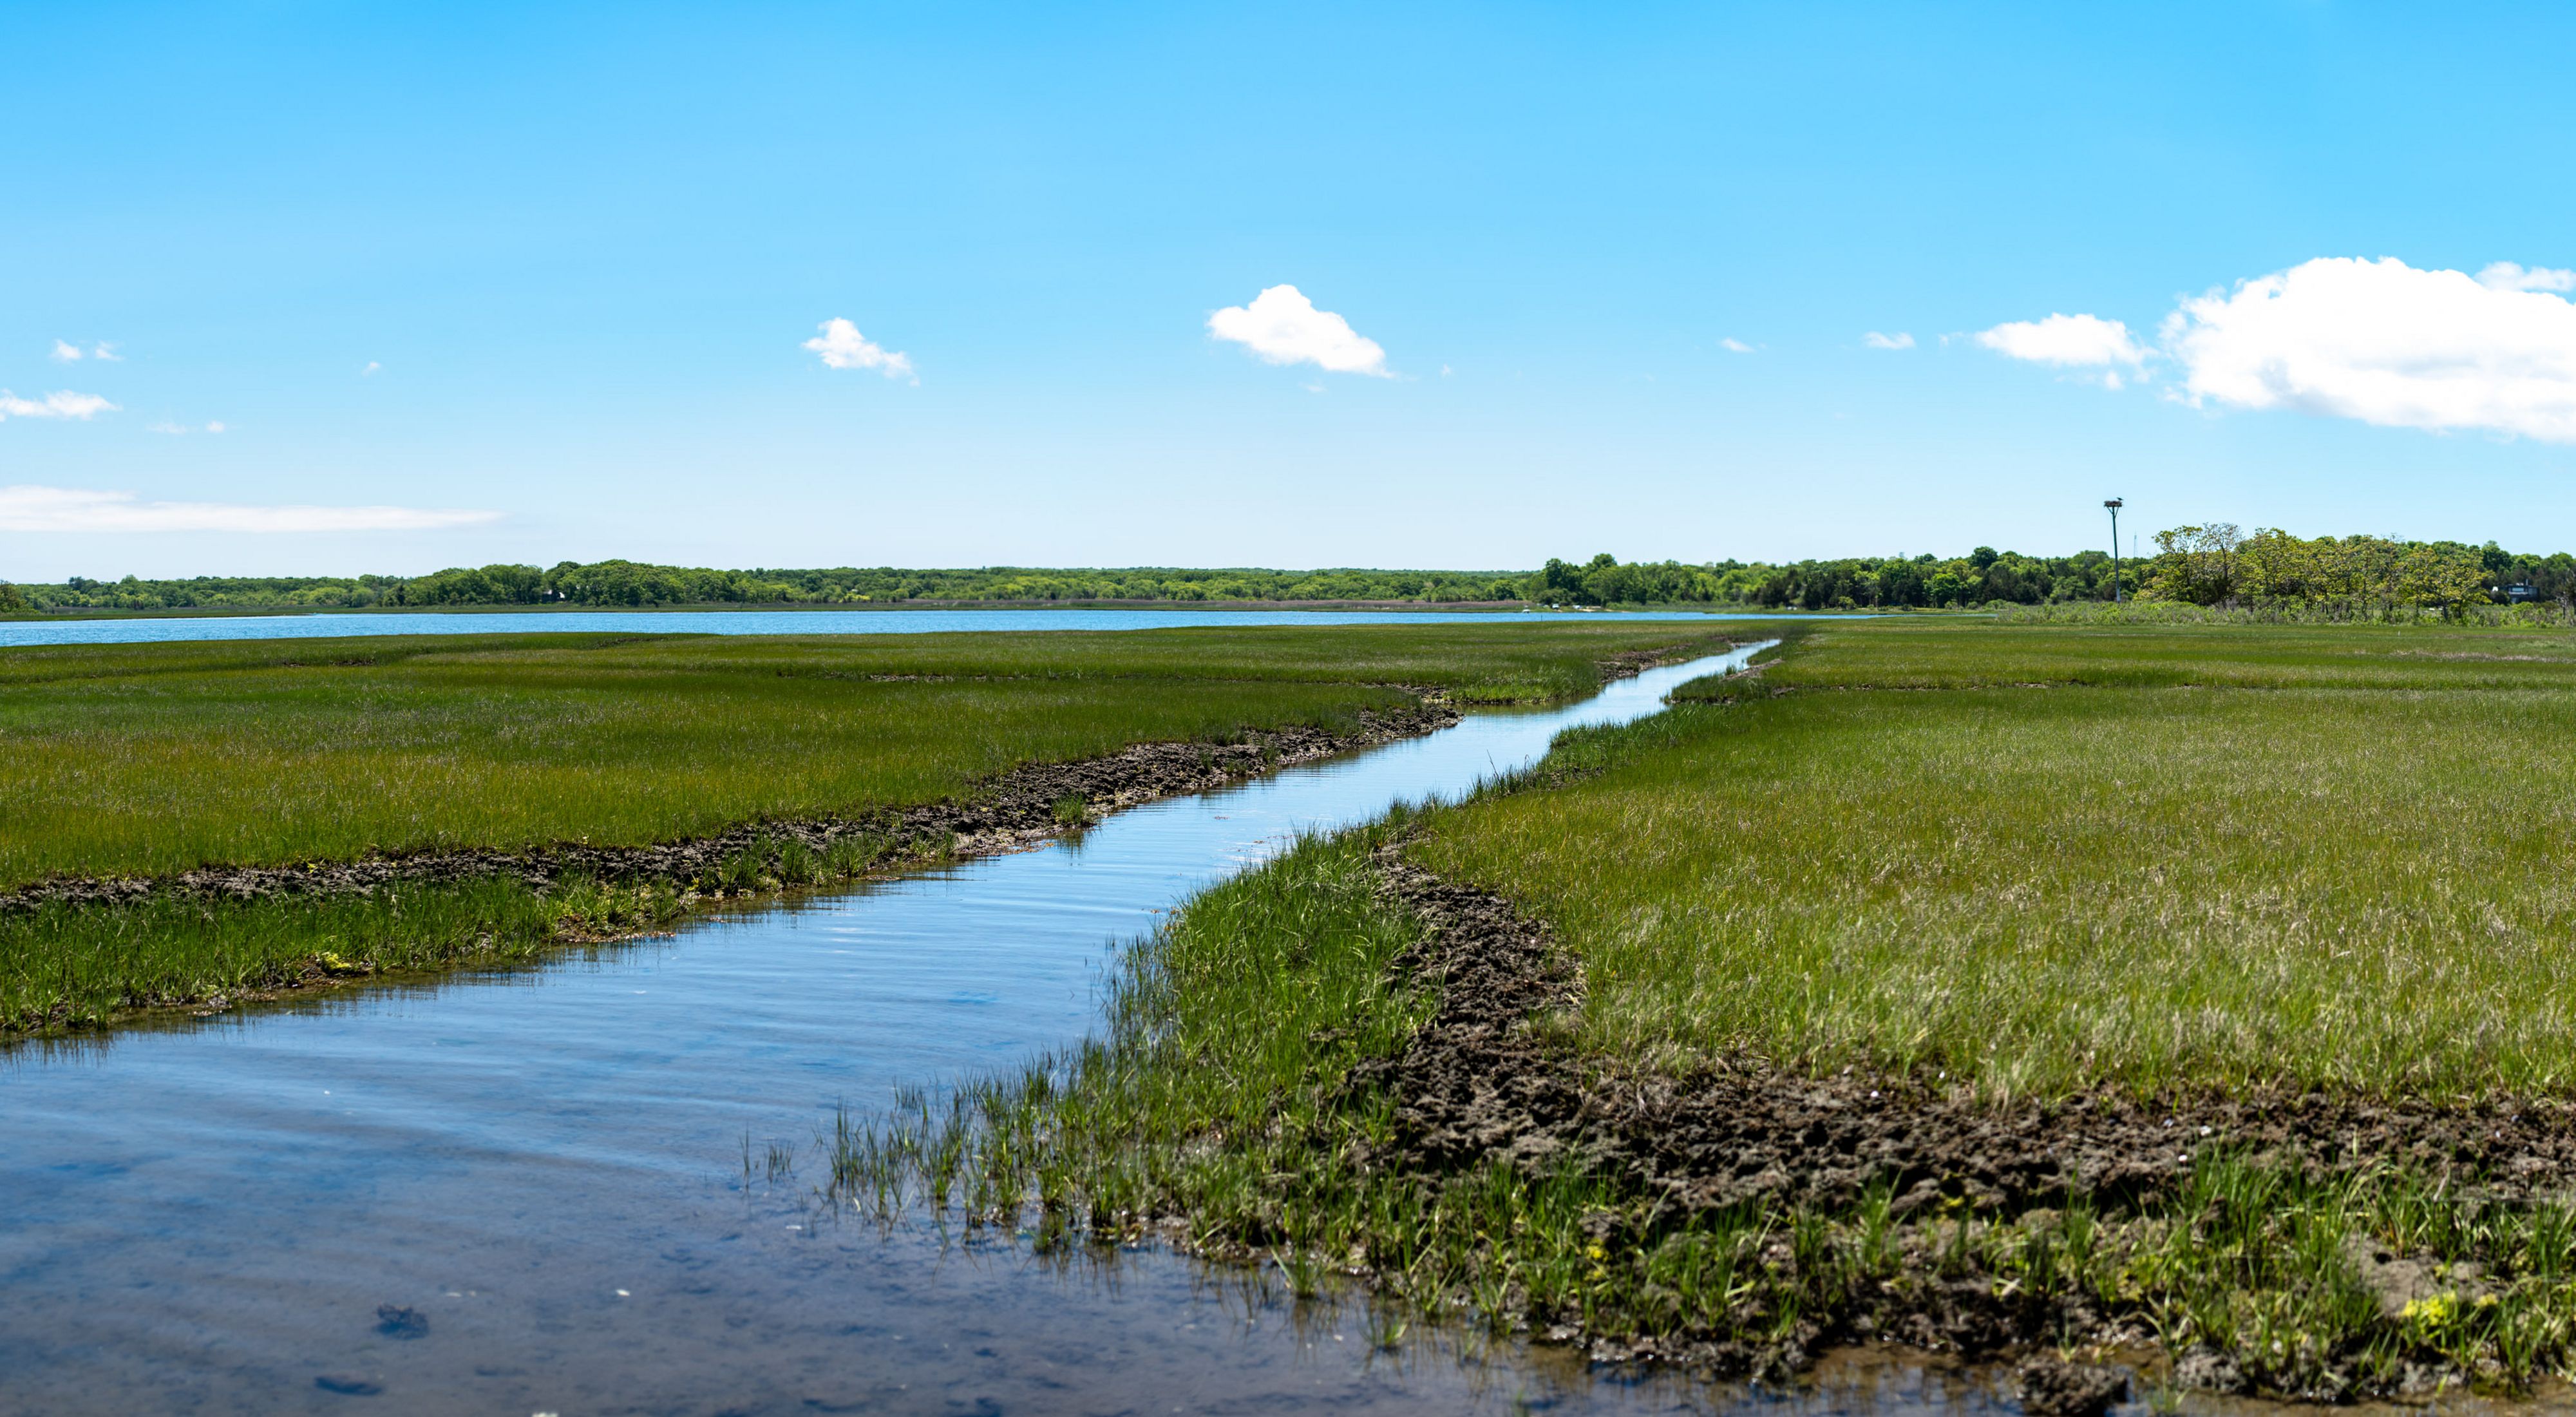 A narrow stream meanders through a bright green salt marsh under blue skies with scattered clouds.